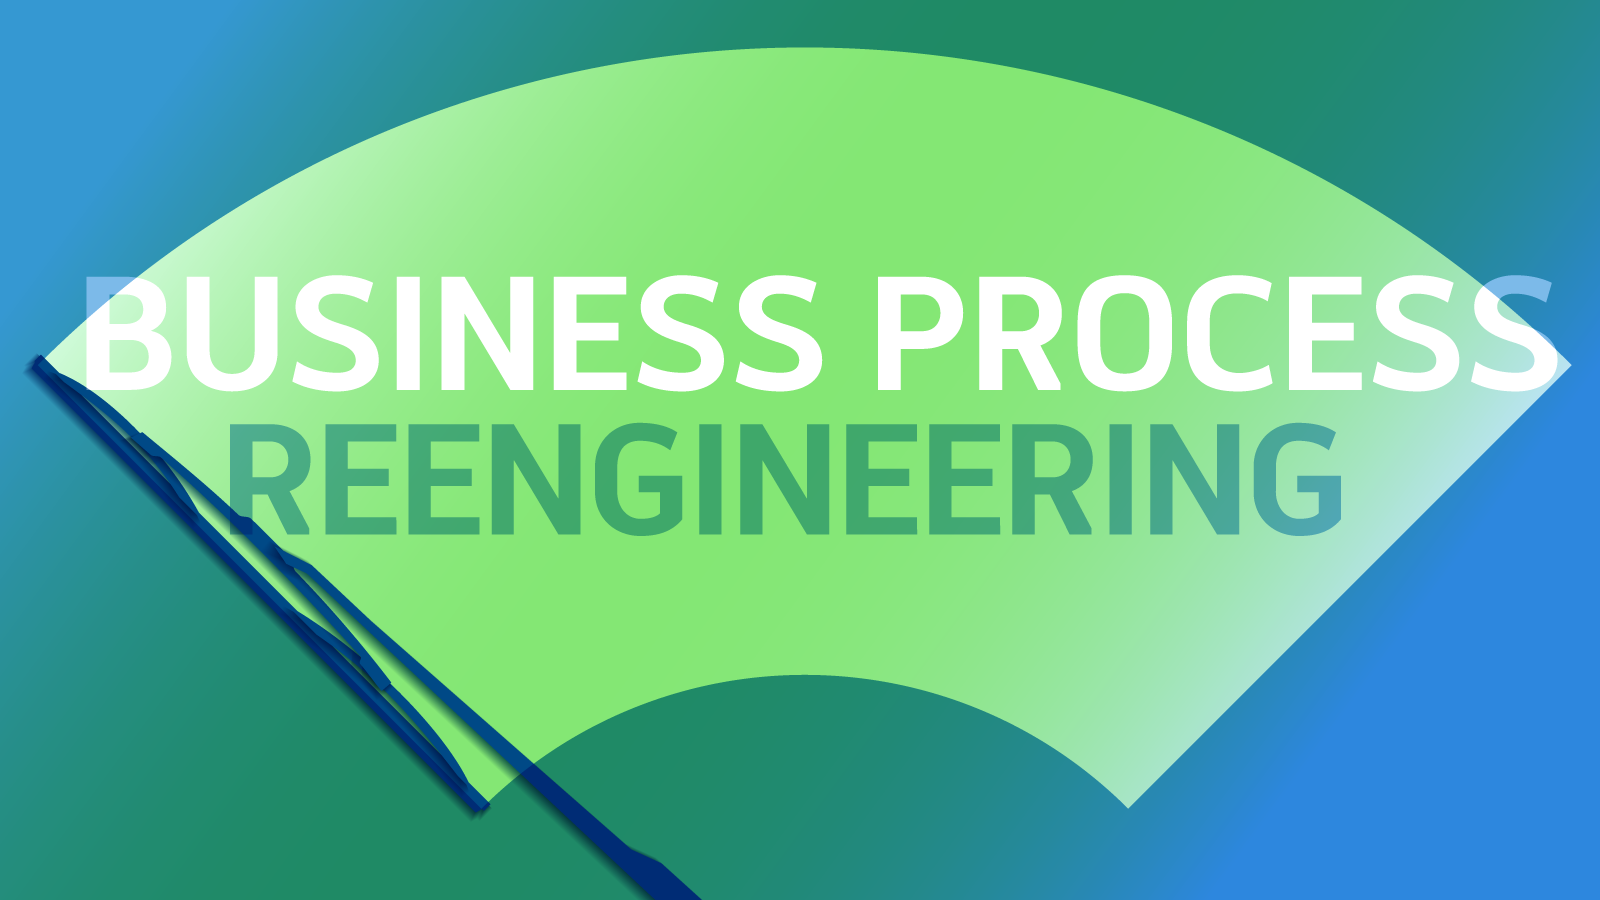 Business processes reengineering to be driven by technology in the post covid-19 era